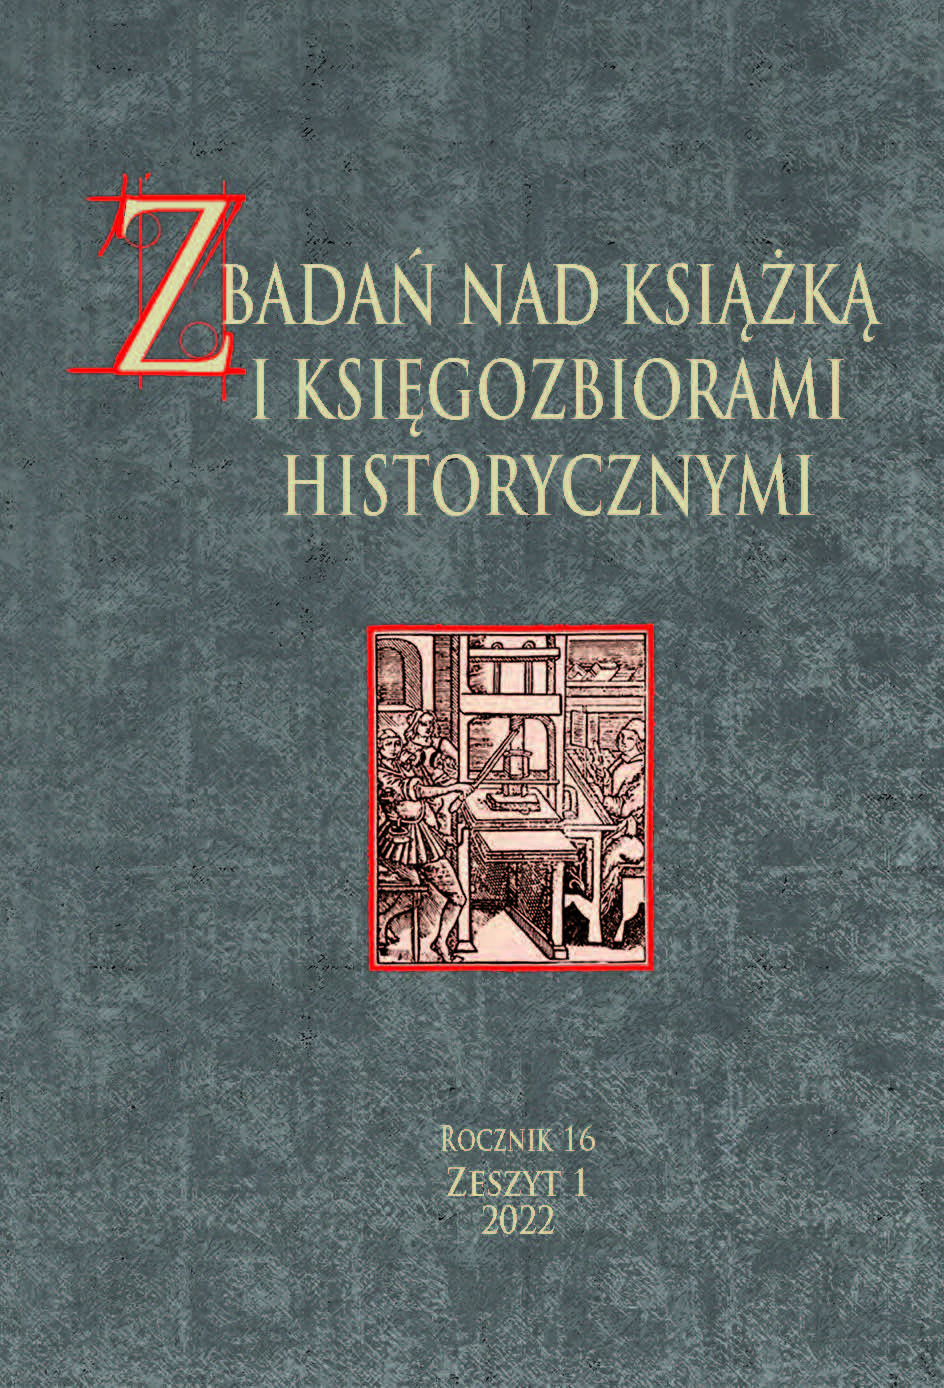 In memory of Małgorzata Komza (1046-2022), researcher of the art of the book and the aesthetics of print Cover Image